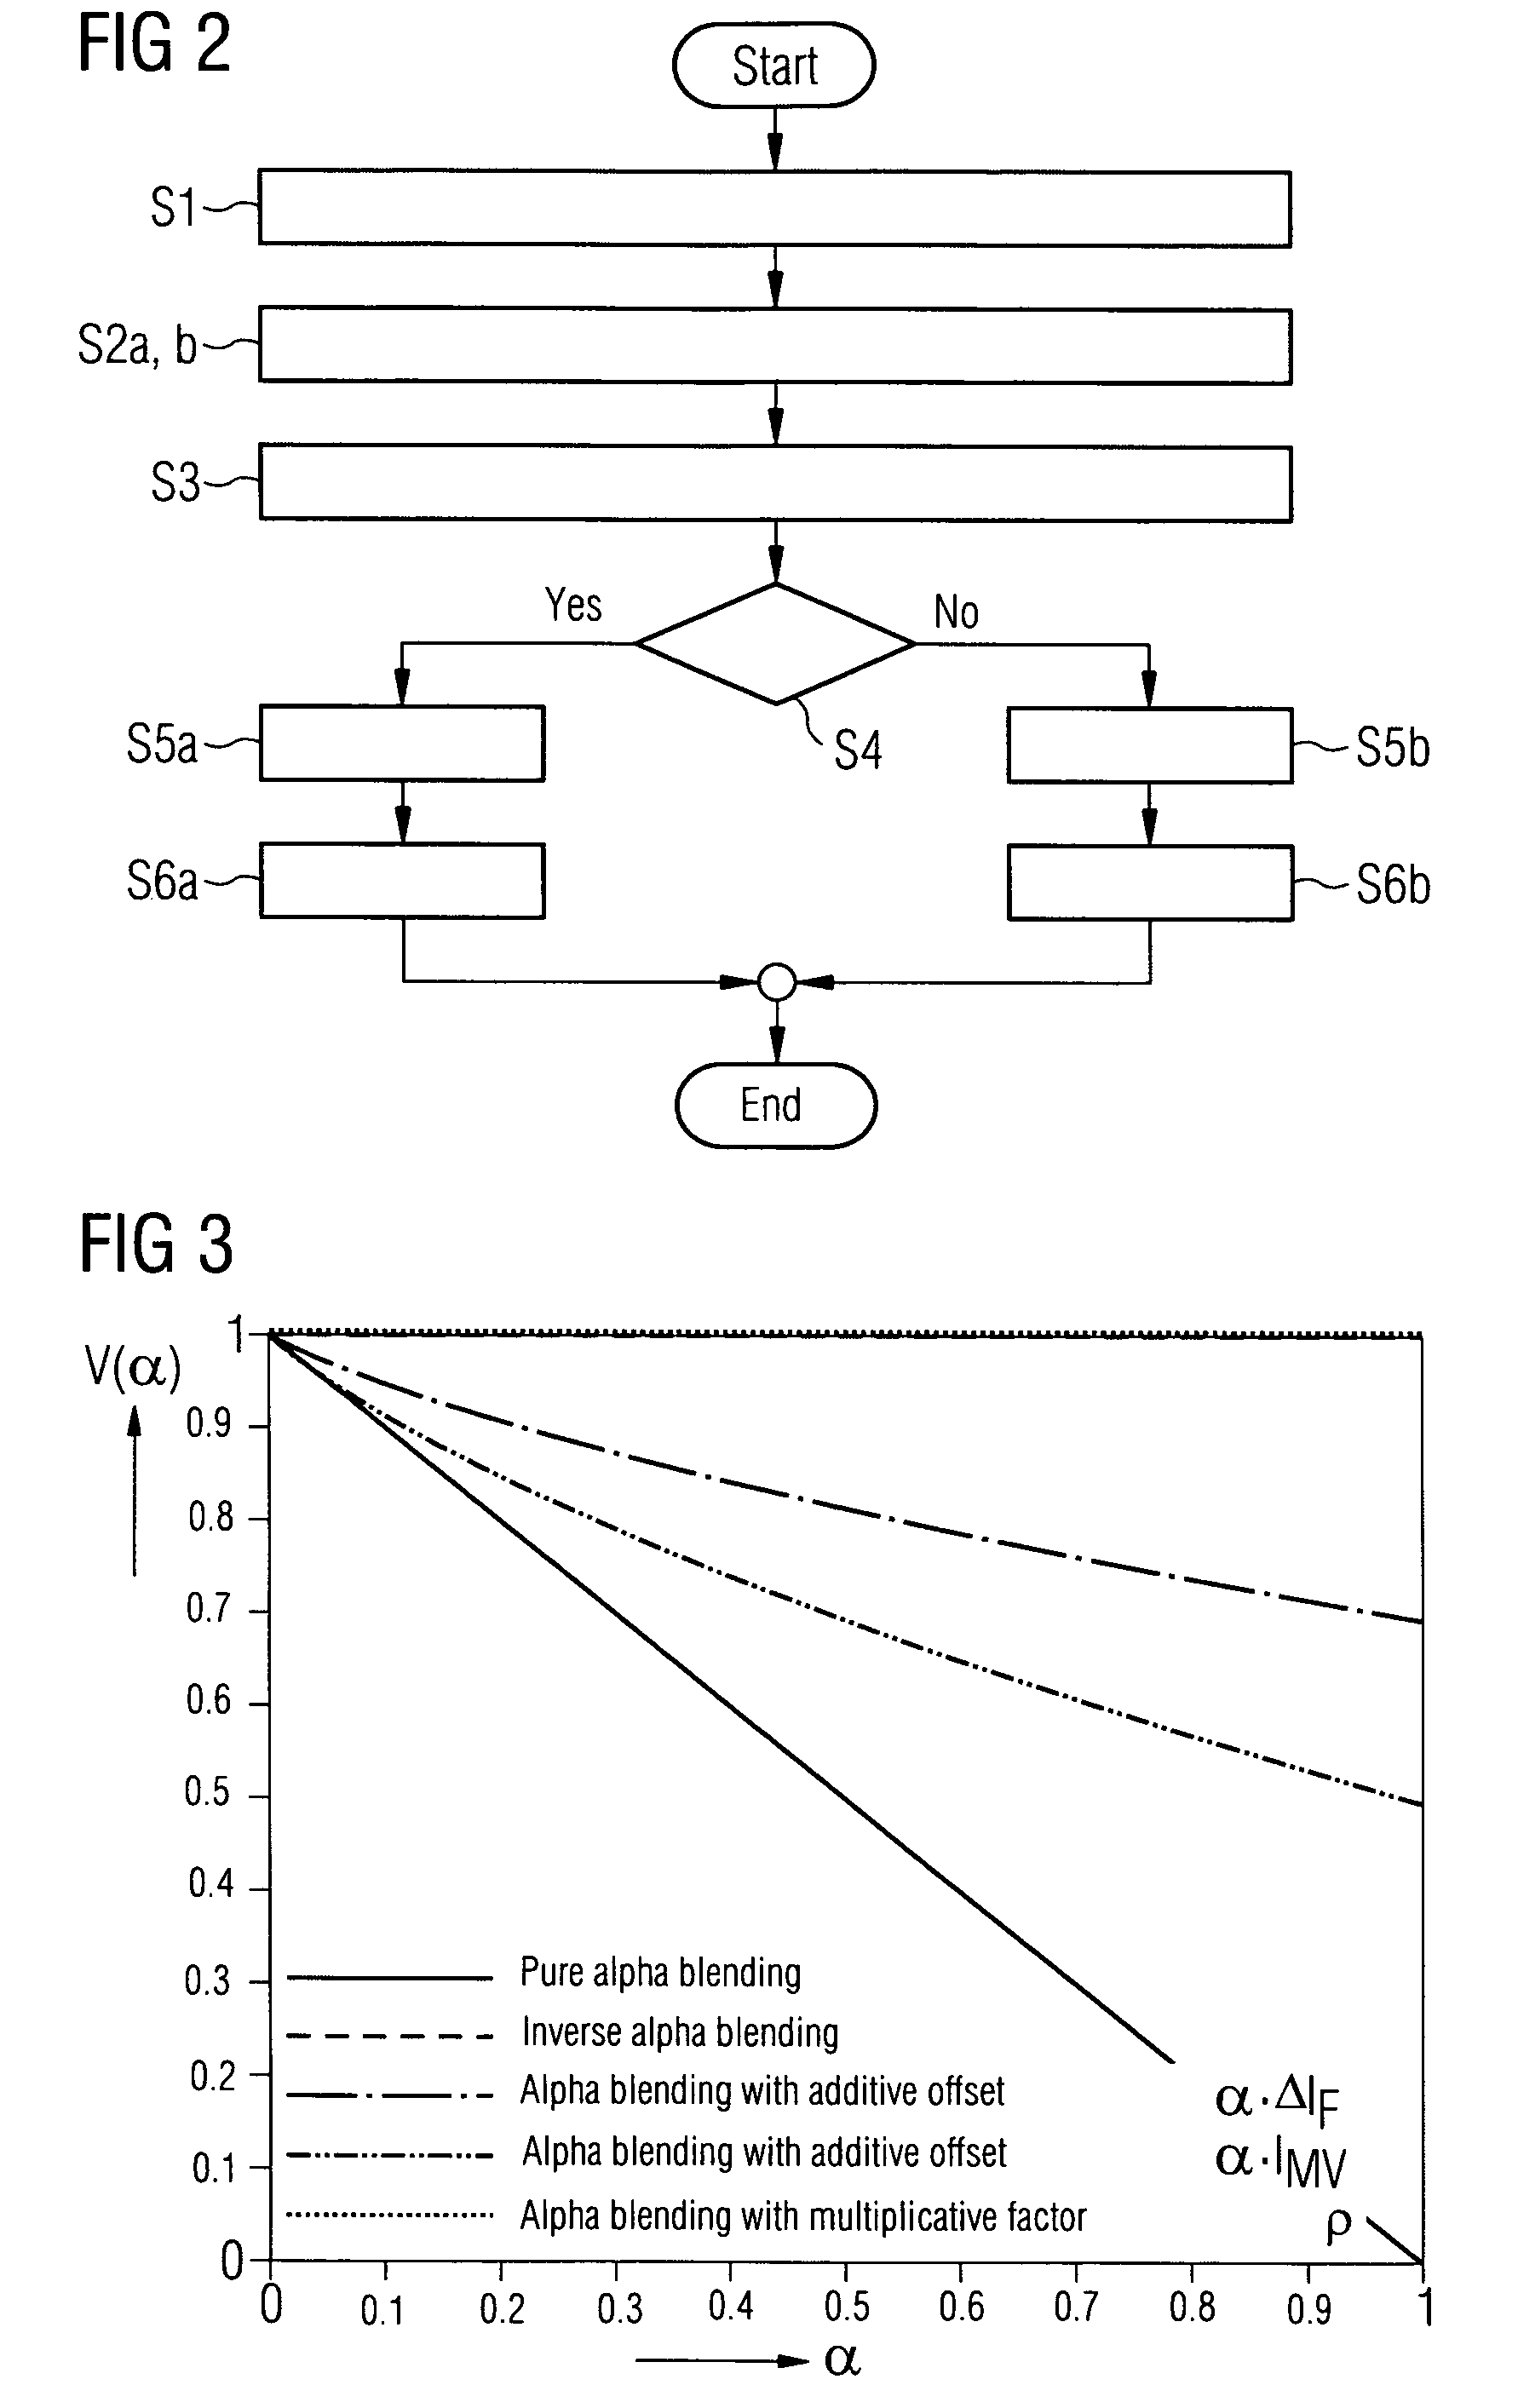 Image system for retaining contrast when merging image data